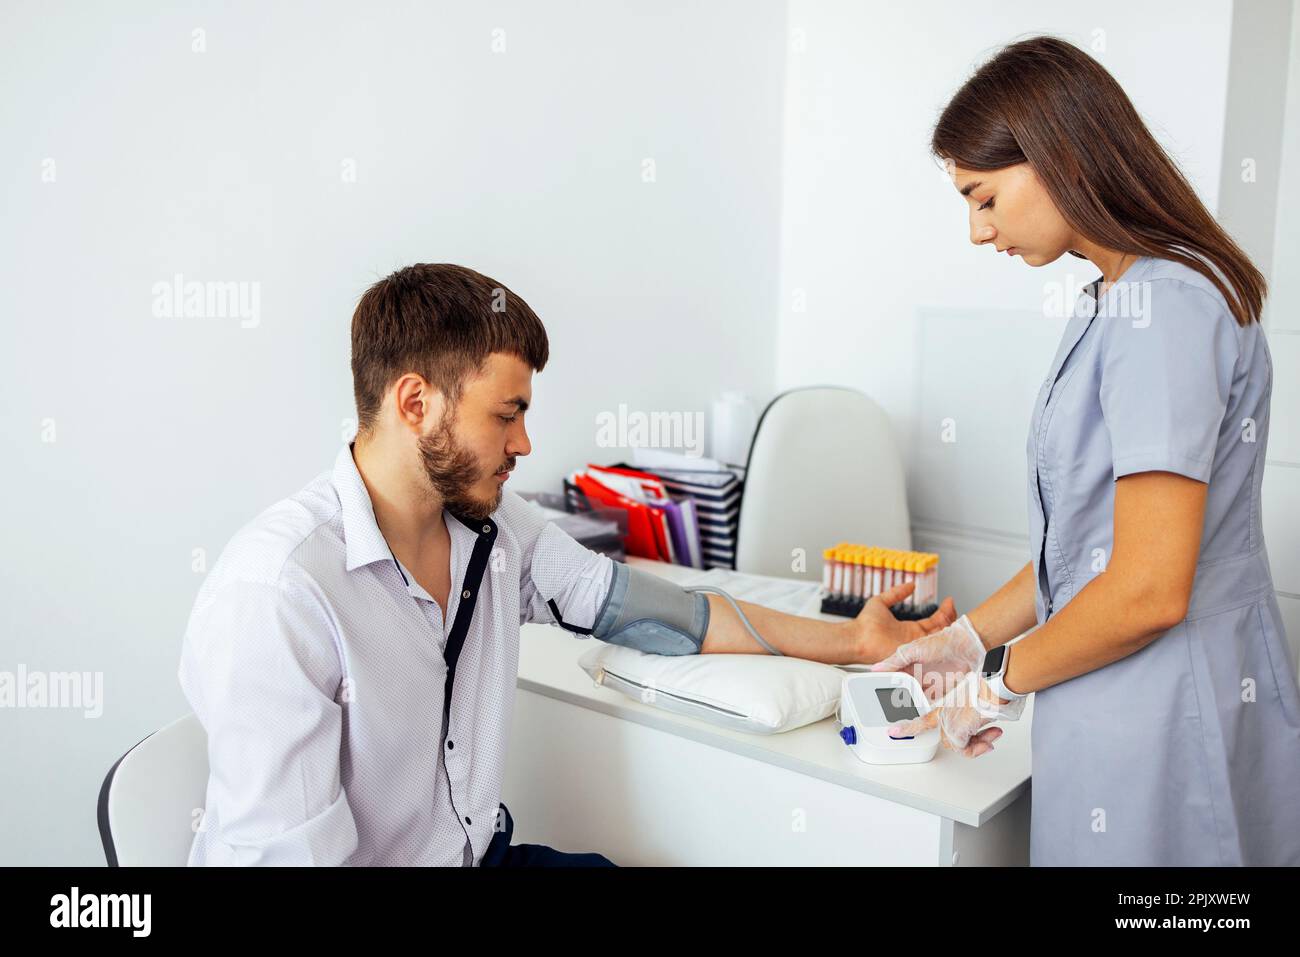 Nurse in medical uniform and transparent gloves checking blood pressure of young man in casual clothes. Brunette woman presses button on tonometer. Te Stock Photo